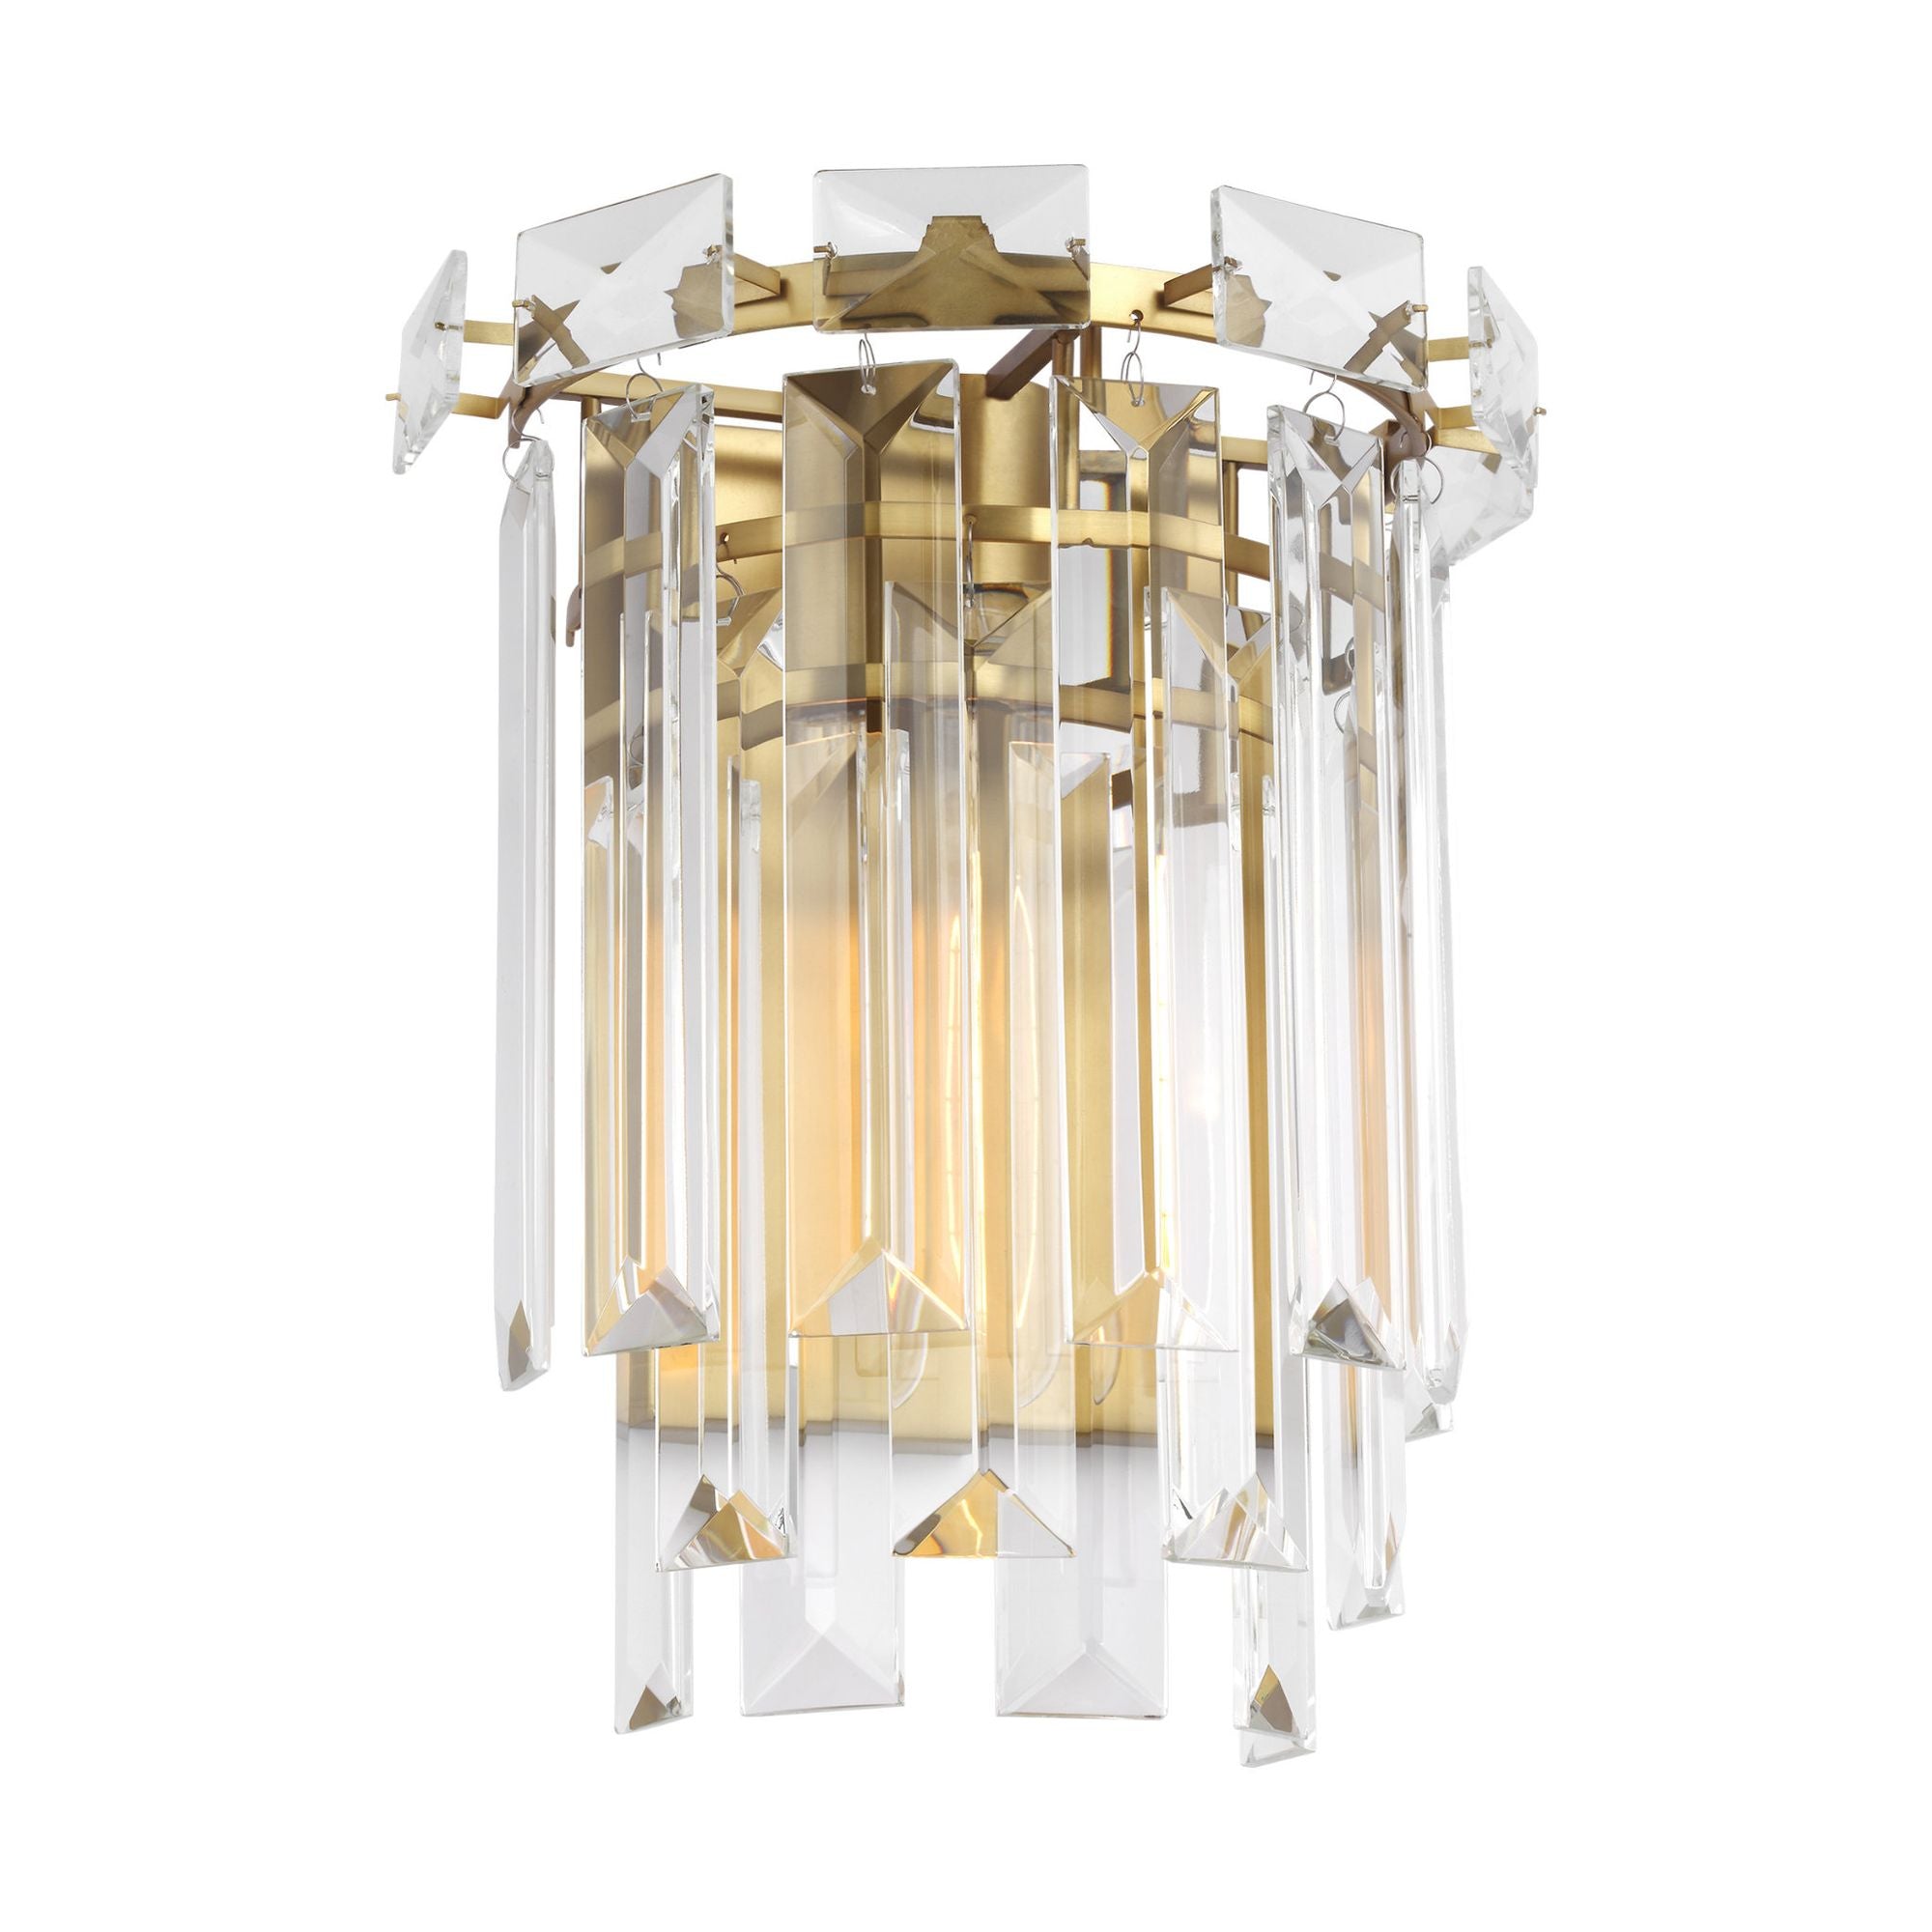 Chapman & Myers Arden Sconce in Burnished Brass